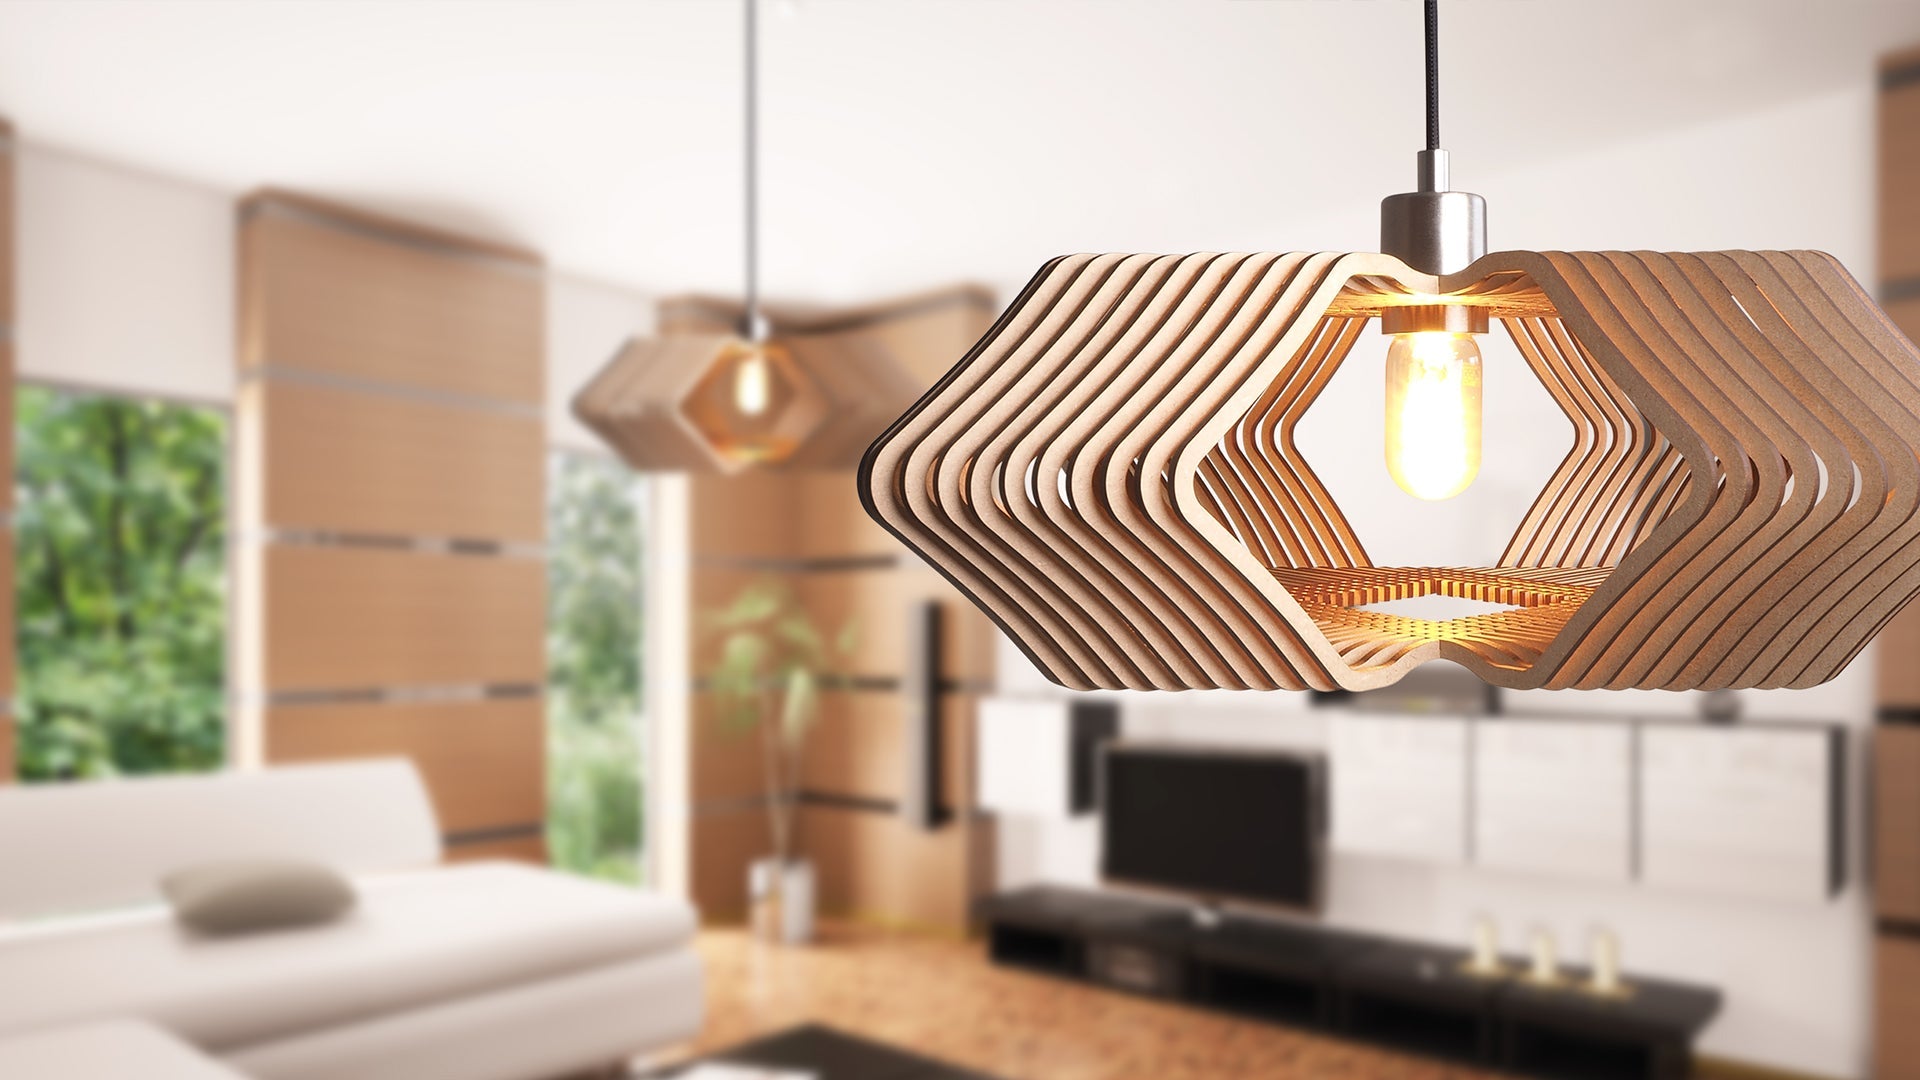 Zooki Pendant Lighting hanging in living space with seating area and TV